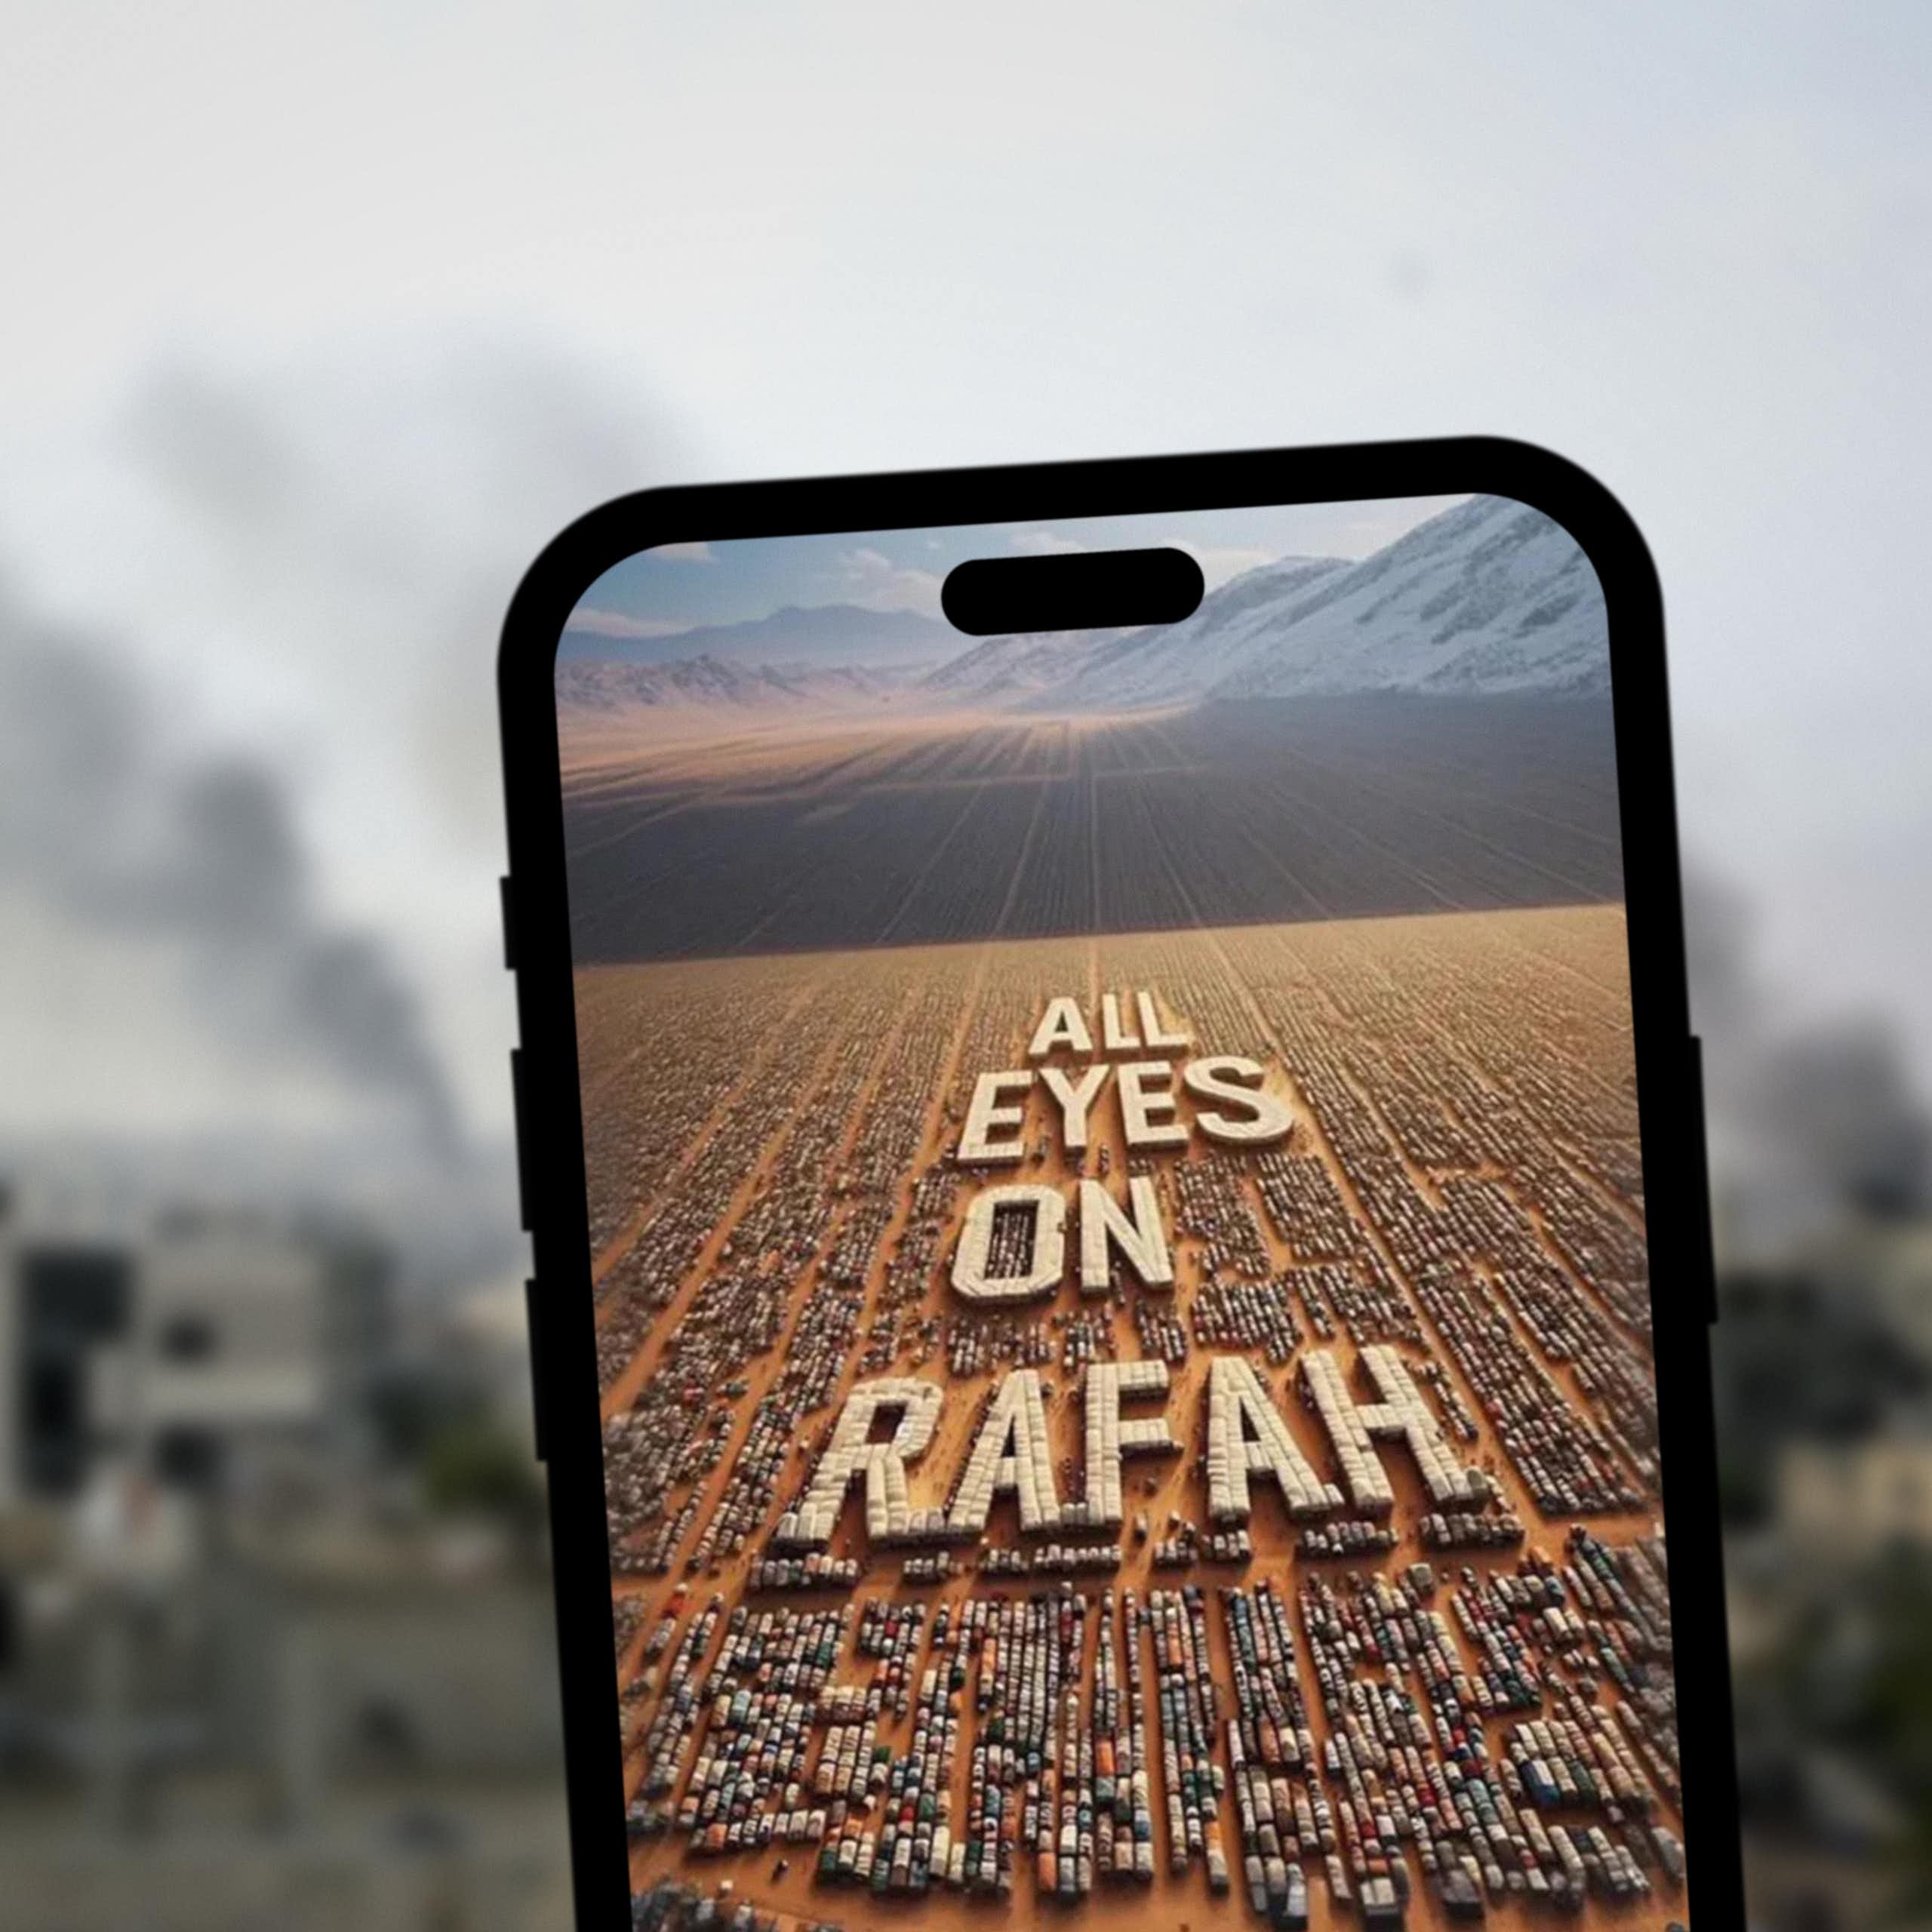 All Eyes On Rafah Instagram story displayed on smartphone screen, while Rafah, Palestine is blurred in the background.